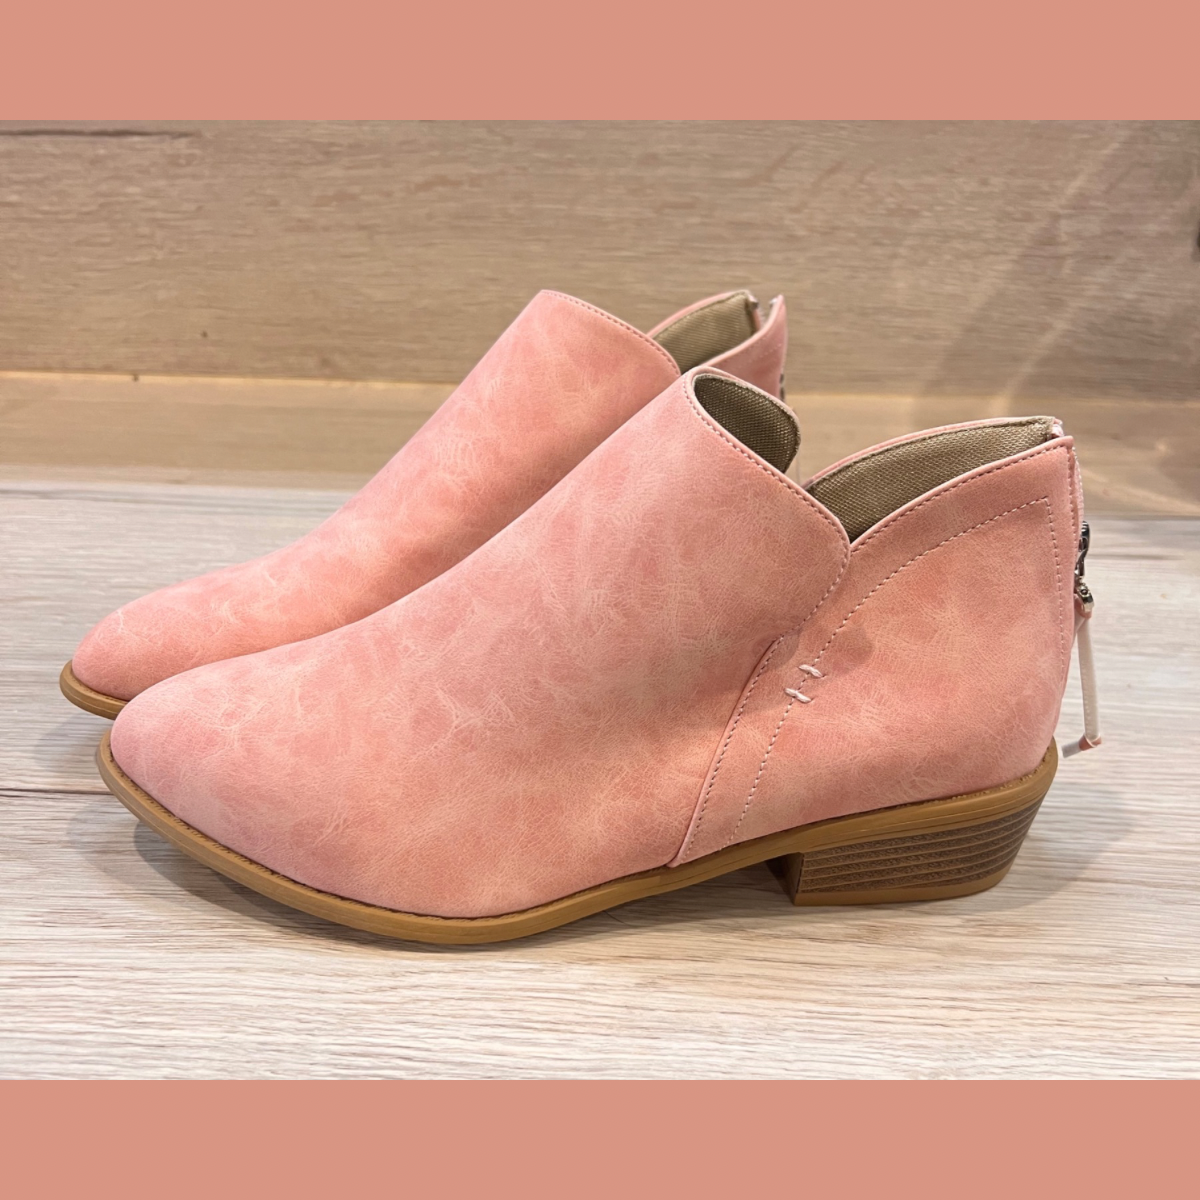 PINK SUEDE LOW HEEL ALMOND TOE CUT SIDE ANKLE BOOTS